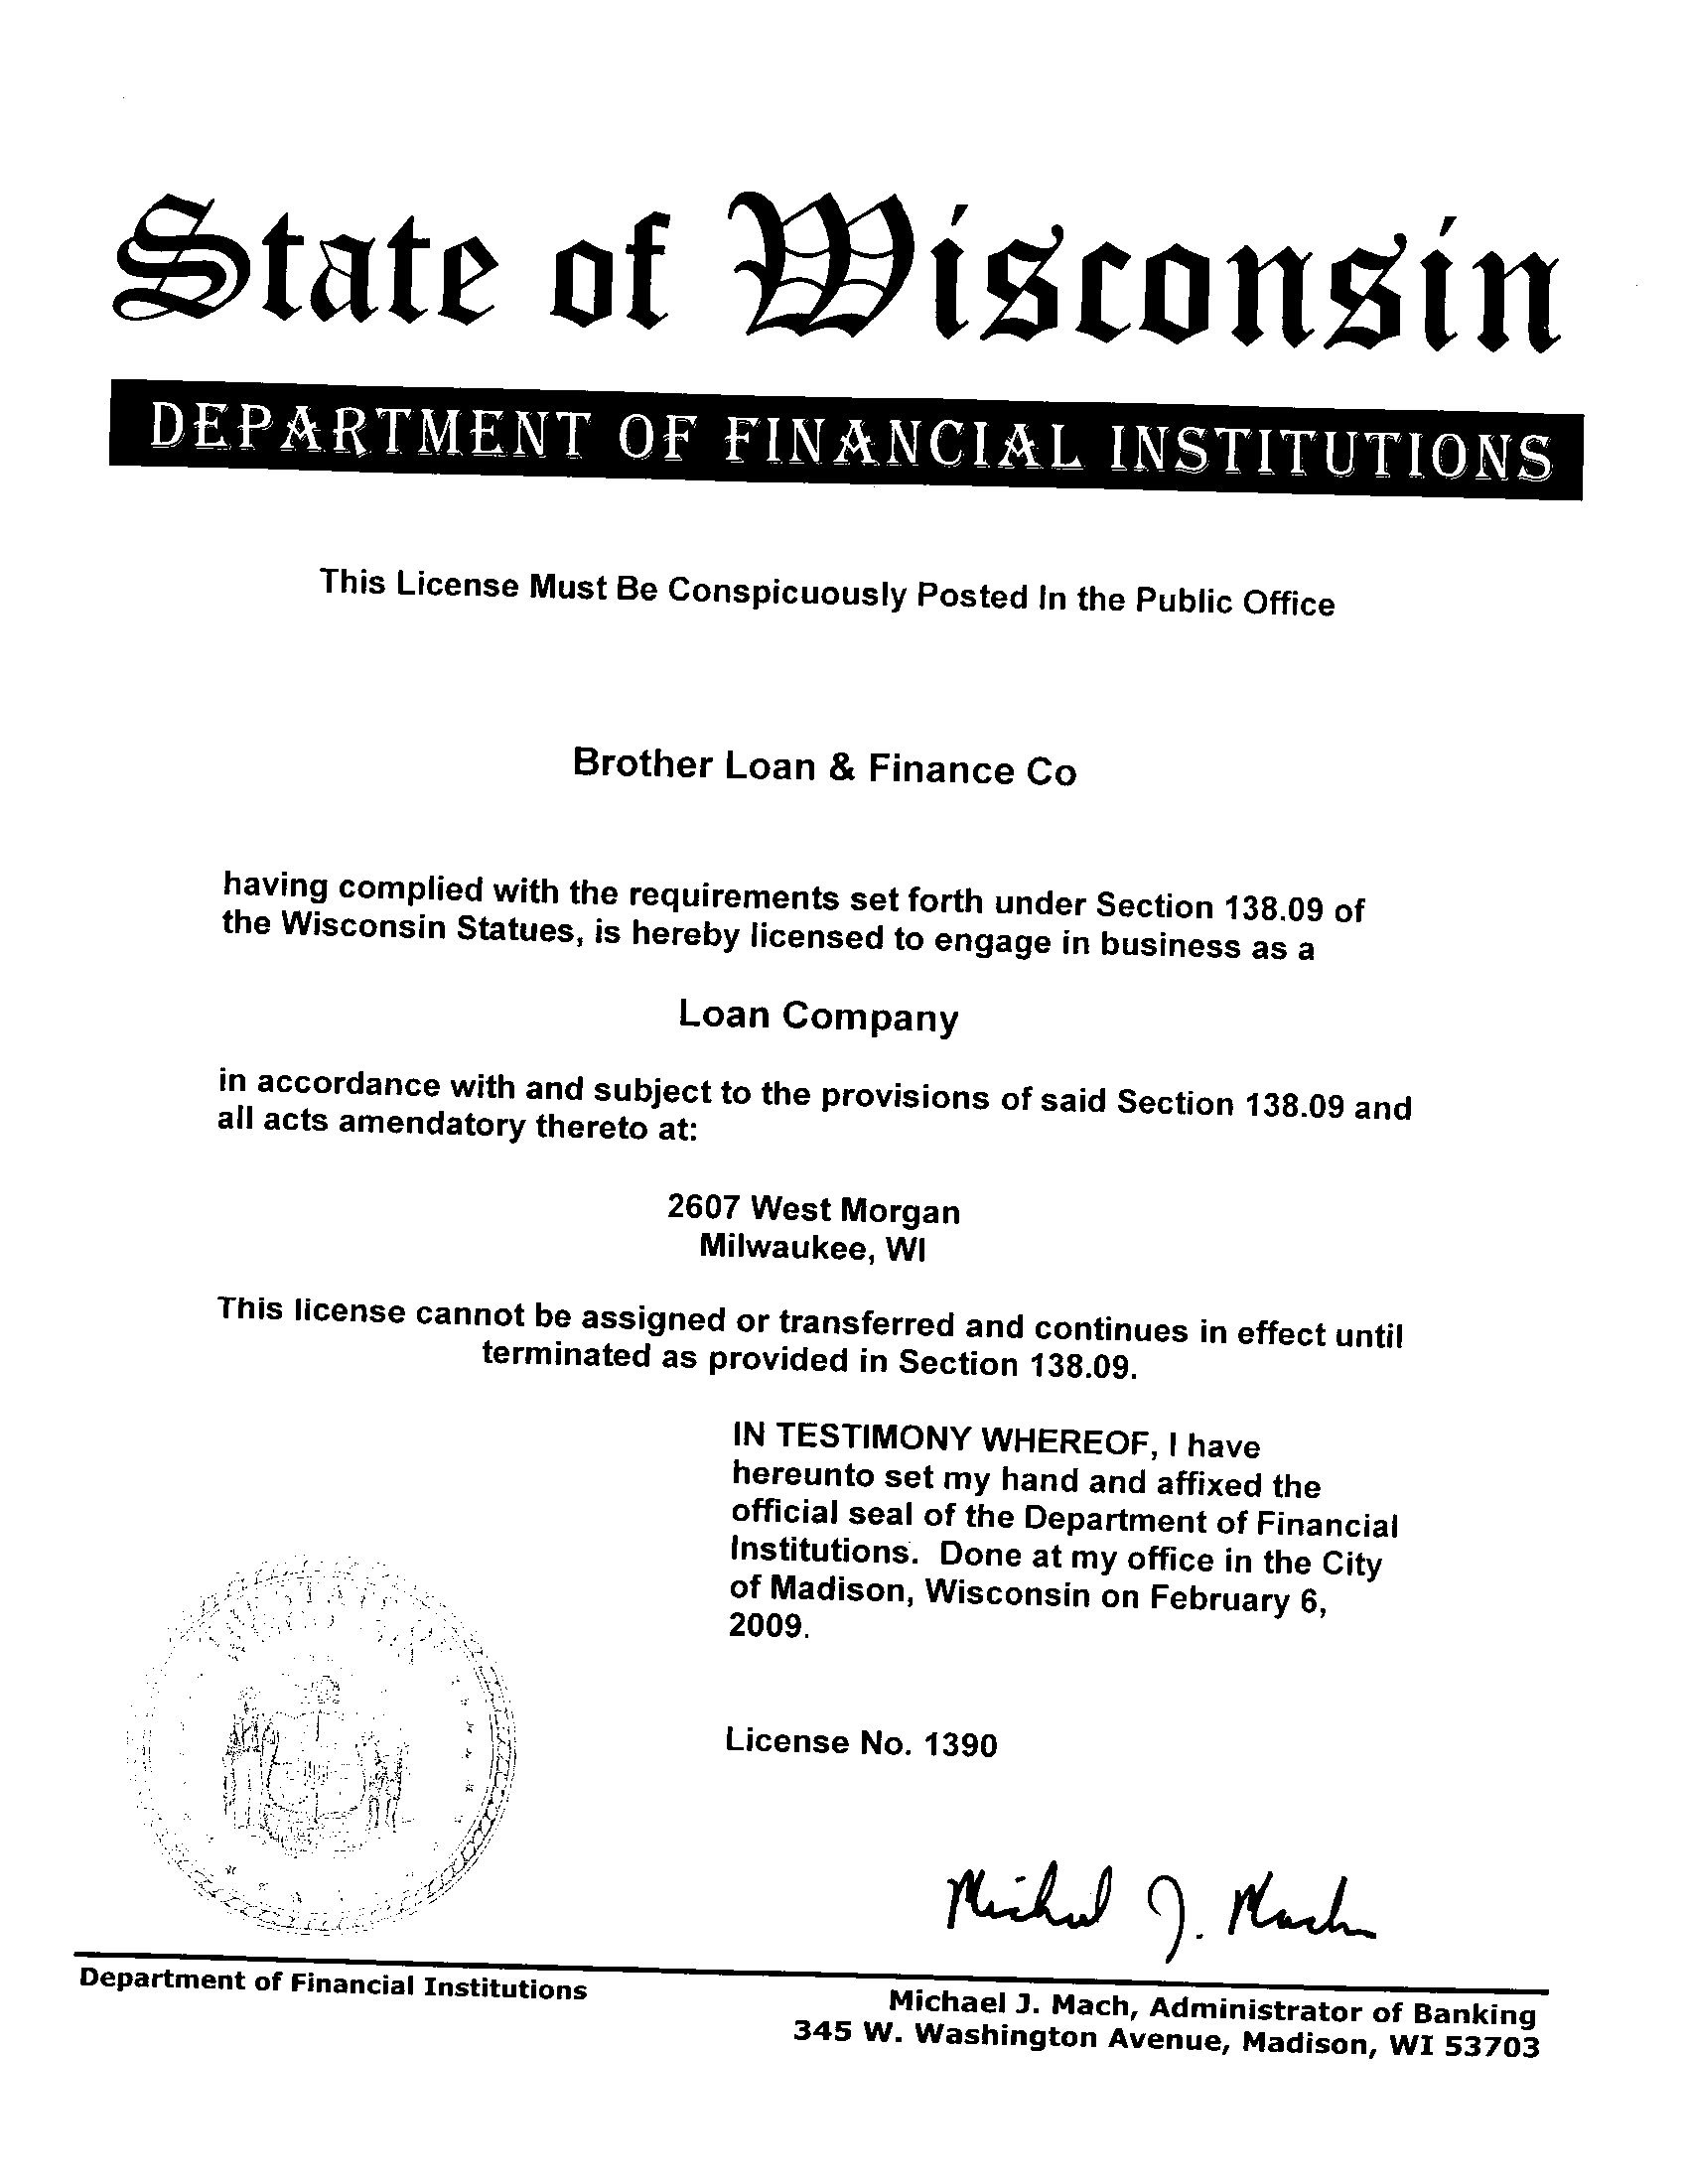 Wisconsin license and/or registration